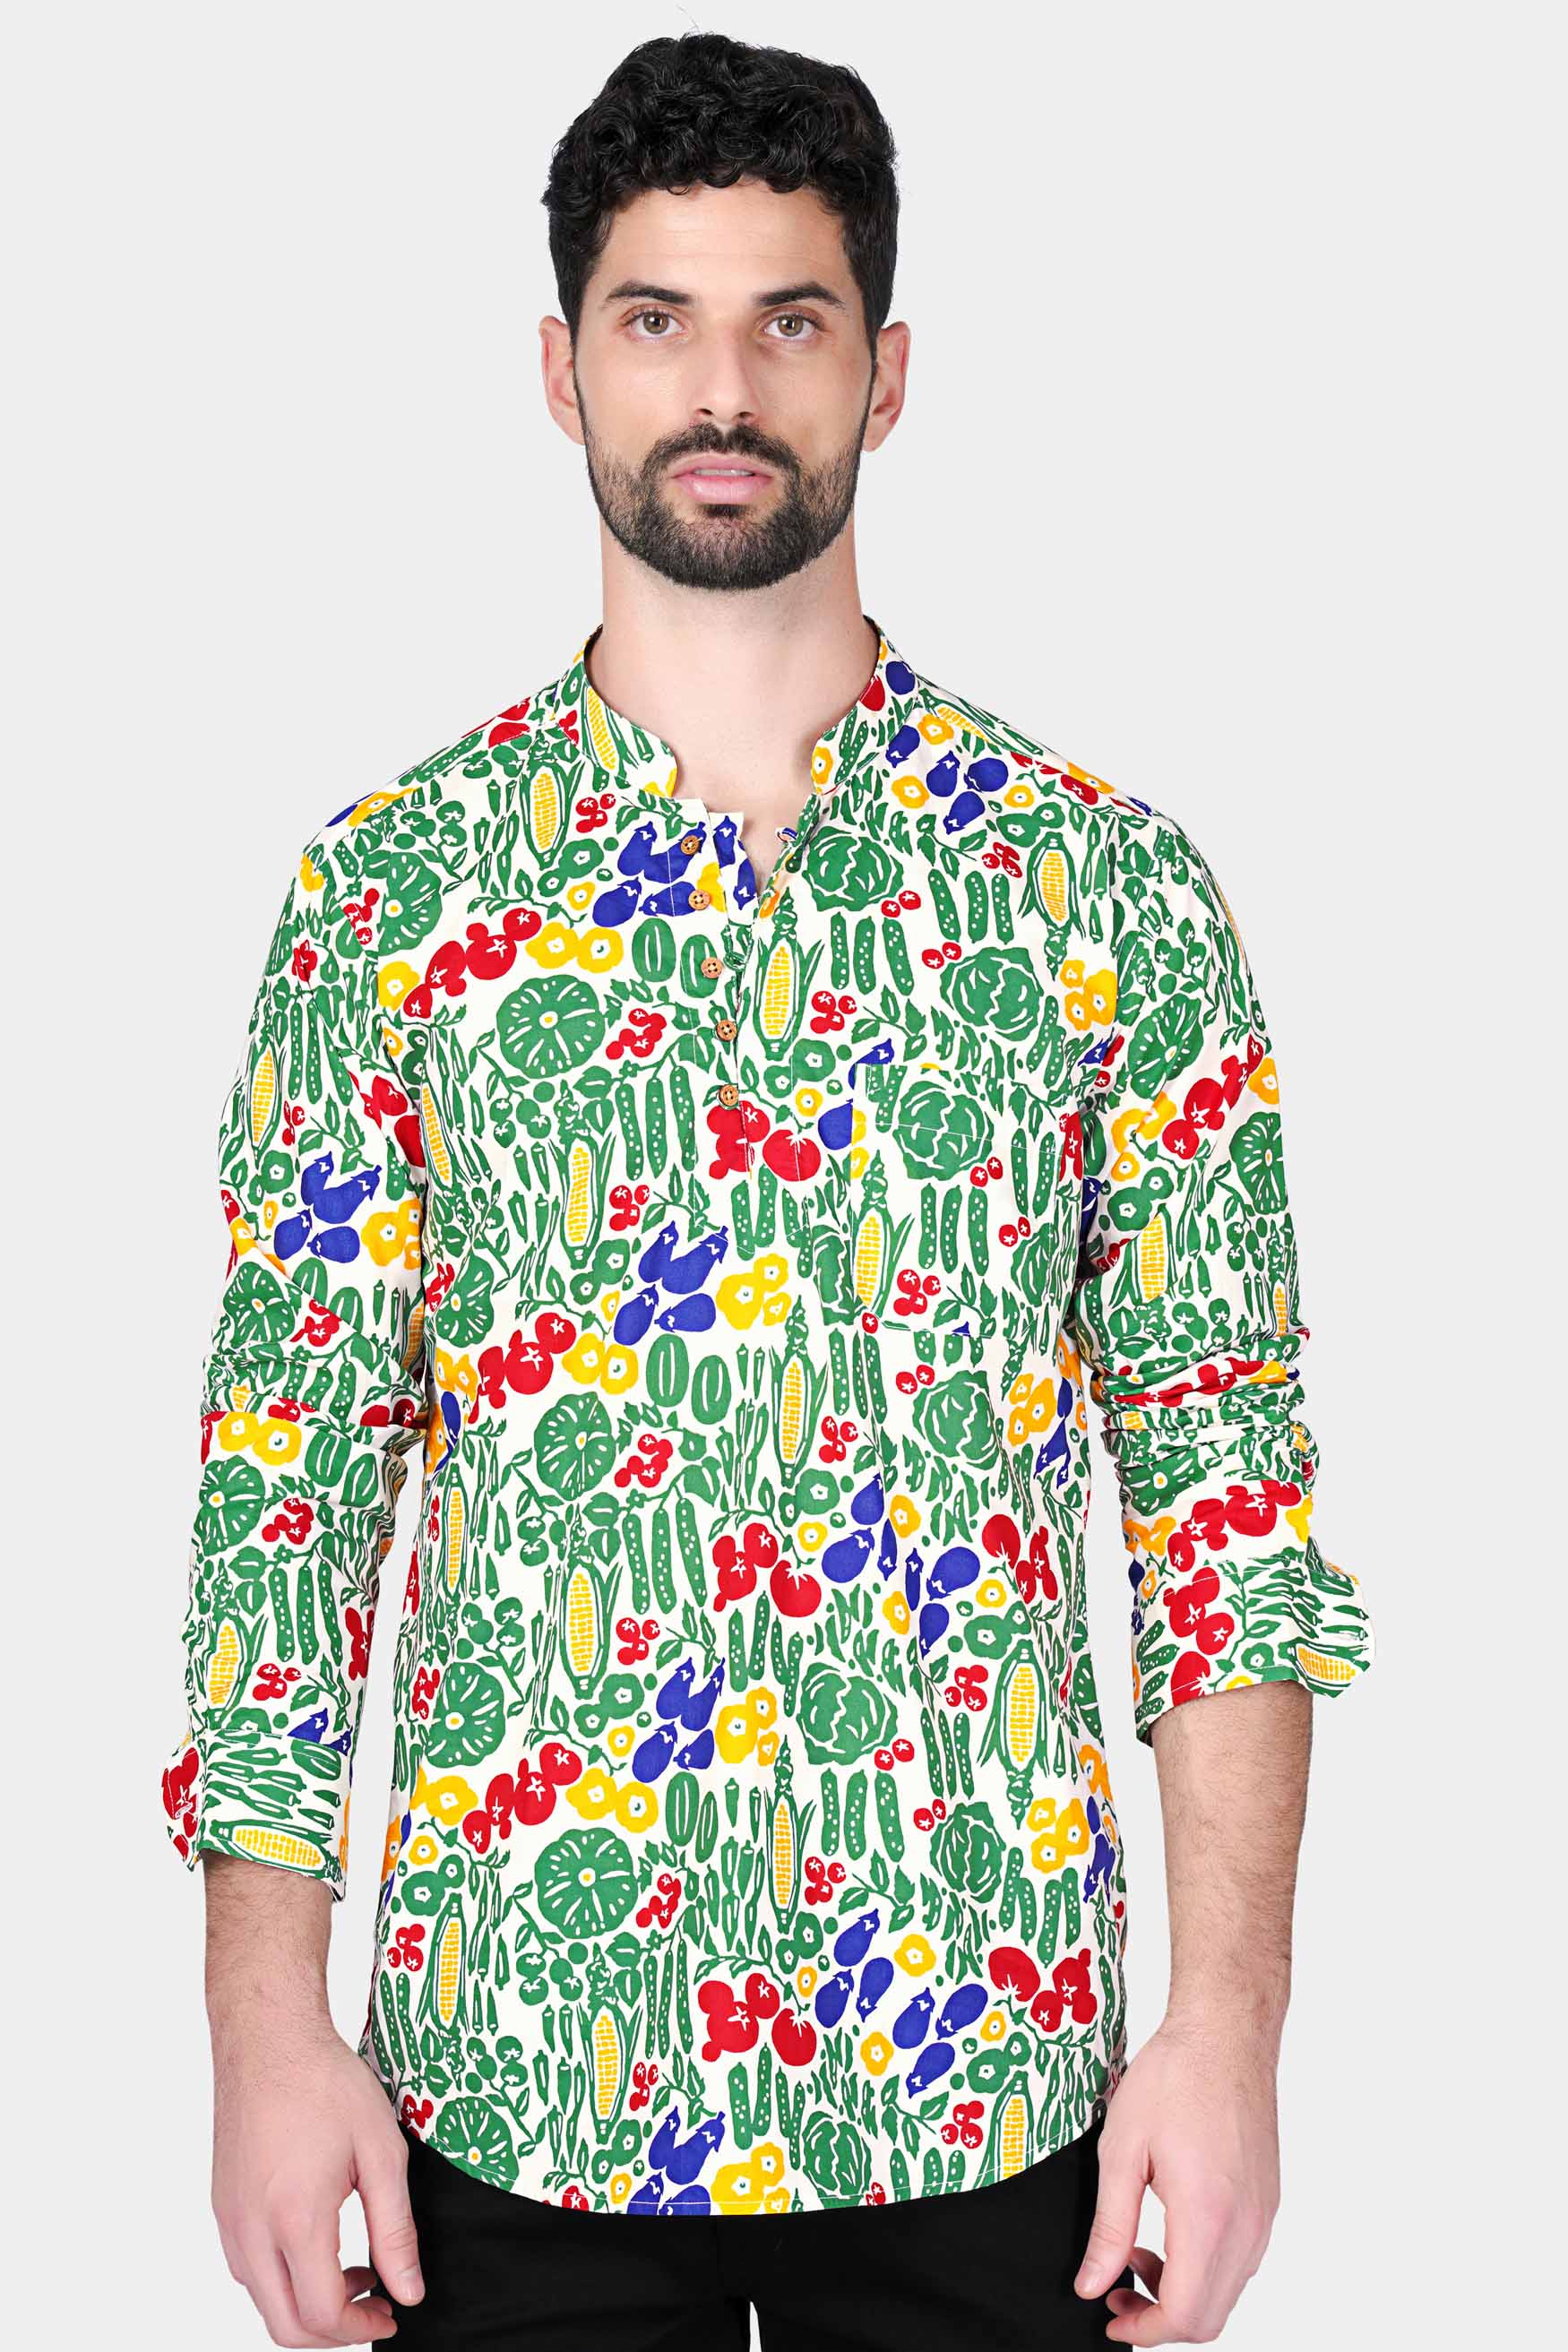 Bright White Multicolour Vegetables Printed with Brand Name Embroidered Premium Cotton Designer Kurta Shirt 5670-KS-E286-38, 5670-KS-E286-H-38, 5670-KS-E286-39, 5670-KS-E286-H-39, 5670-KS-E286-40, 5670-KS-E286-H-40, 5670-KS-E286-42, 5670-KS-E286-H-42, 5670-KS-E286-44, 5670-KS-E286-H-44, 5670-KS-E286-46, 5670-KS-E286-H-46, 5670-KS-E286-48, 5670-KS-E286-H-48, 5670-KS-E286-50, 5670-KS-E286-H-50, 5670-KS-E286-52, 5670-KS-E286-H-52